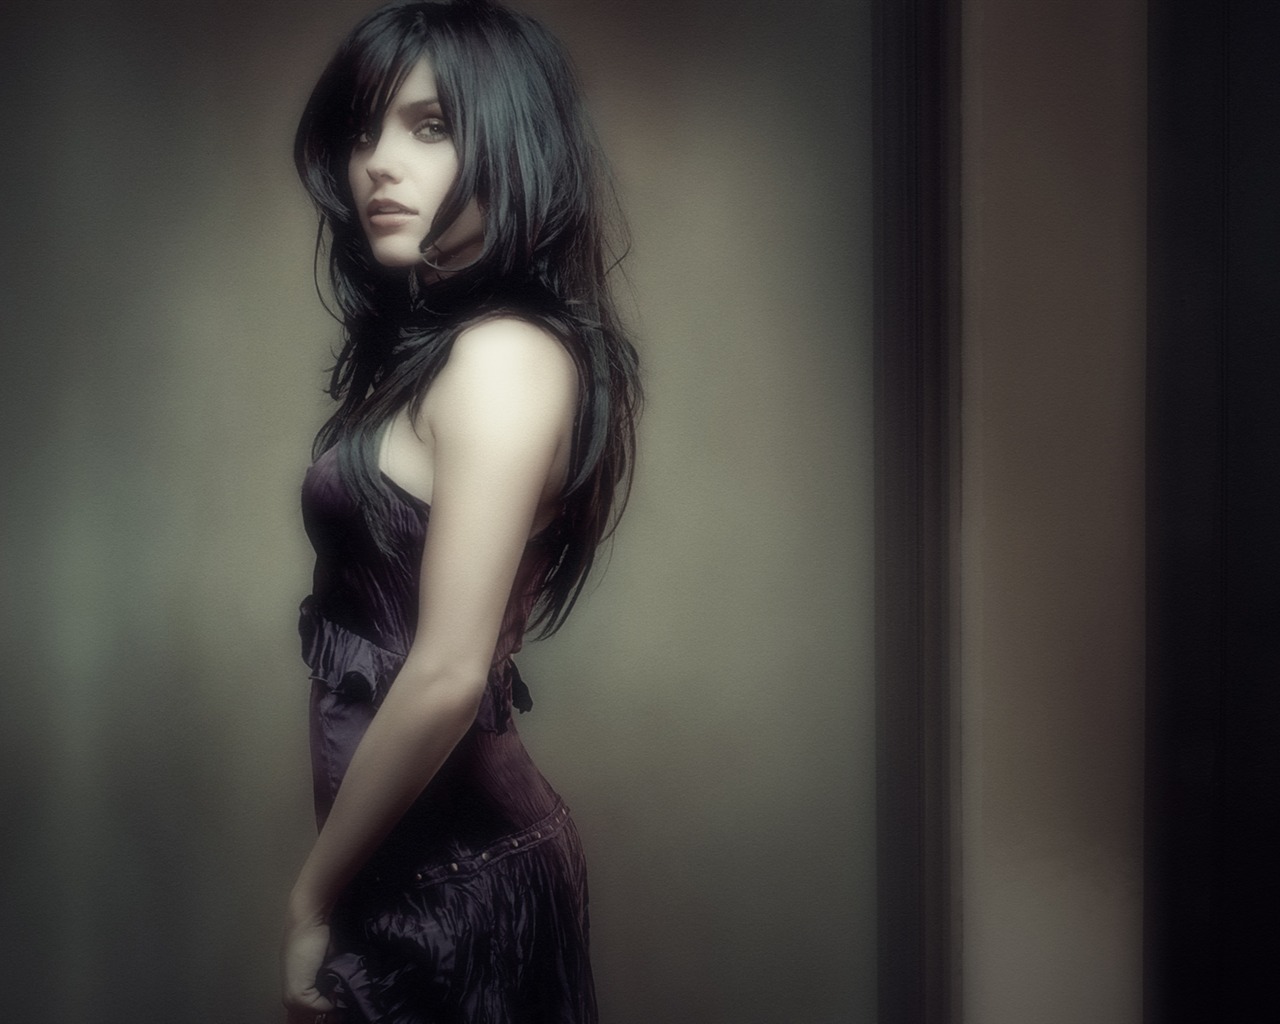 Widescreen Wallpaper Collection actrice (7) #16 - 1280x1024